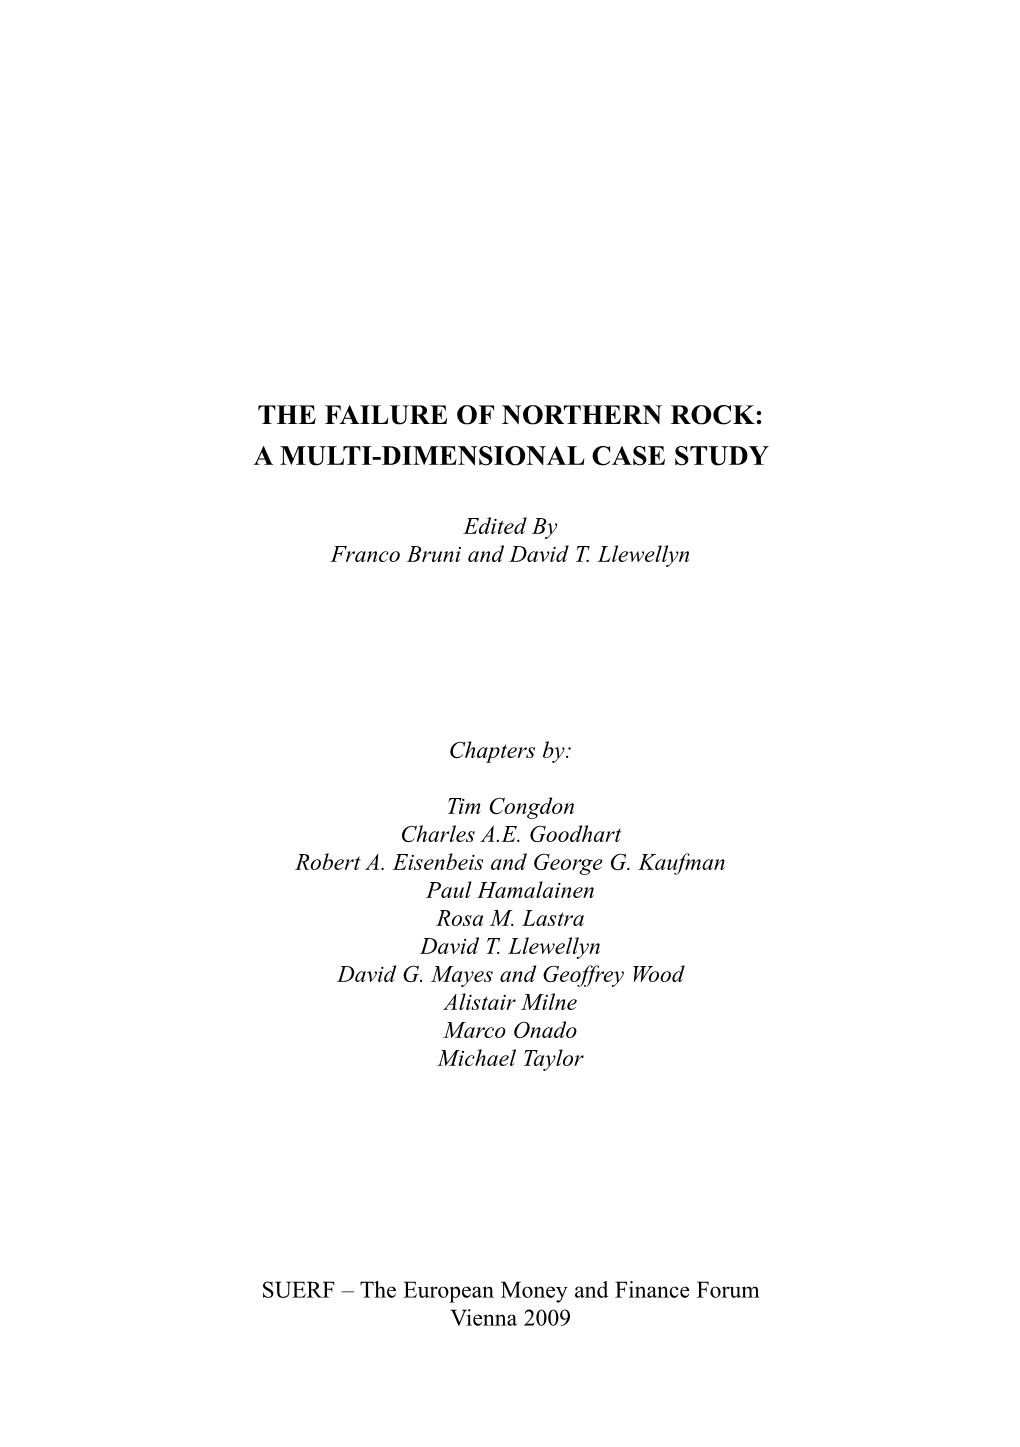 The Failure of Northern Rock: a Multi-Dimensional Case Study